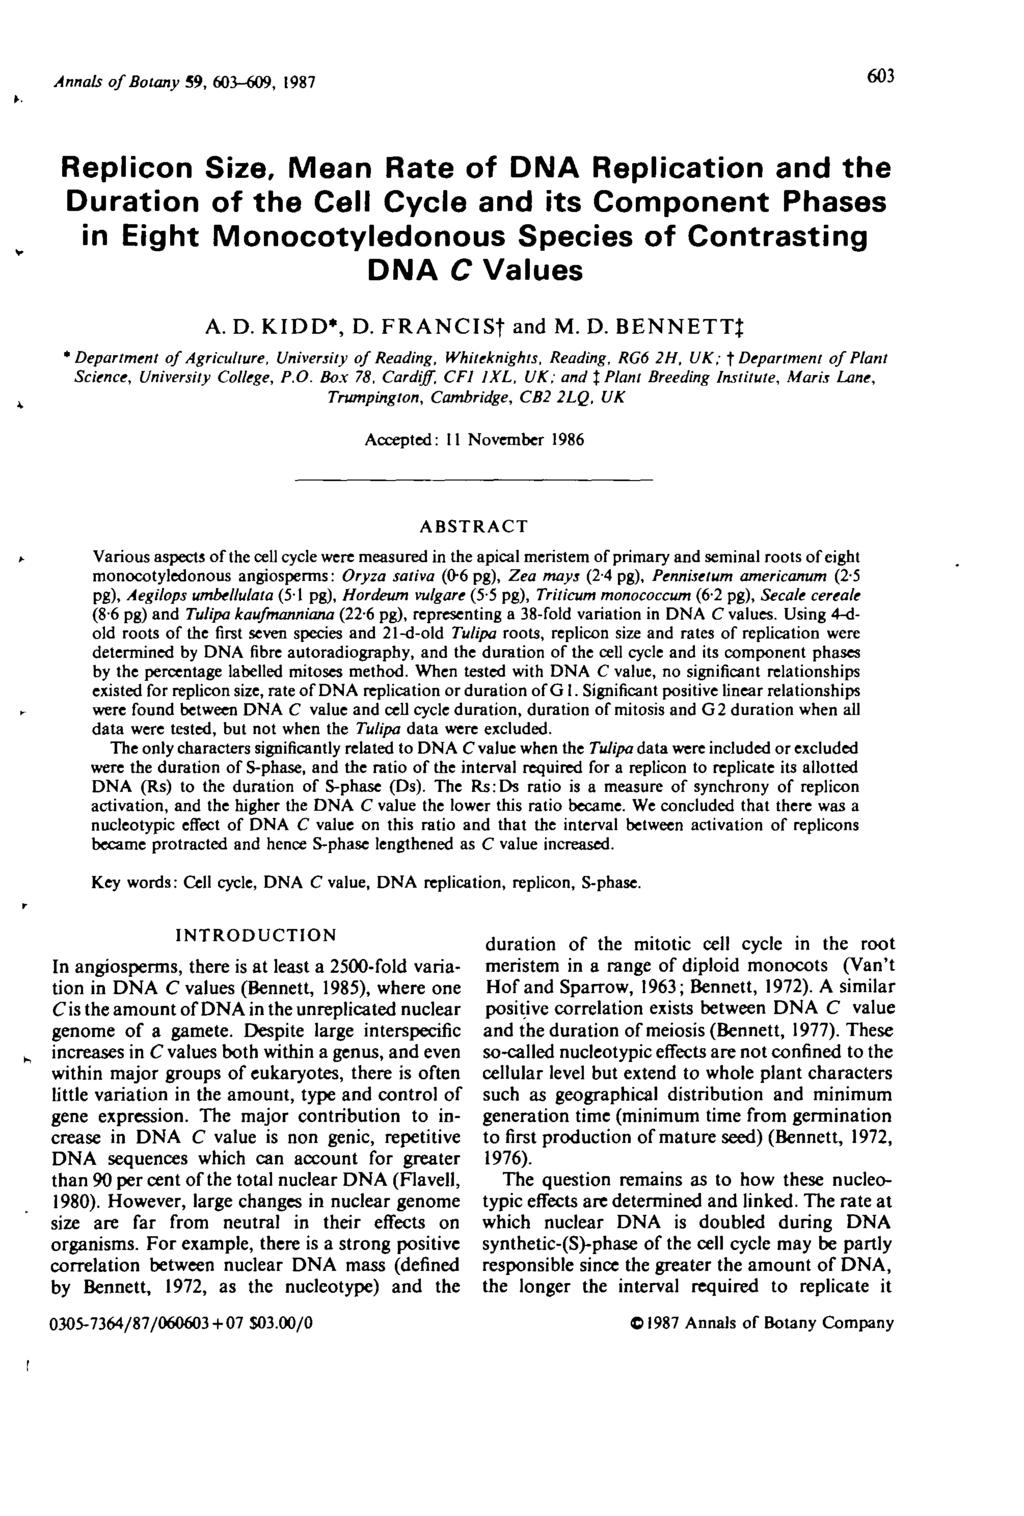 Annals of Botany 59, 603-609, 197 603 Replicon Size, Mean Rate of DNA Replication and the Duration of the Cell Cycle and its Component Phases in Eight Monocotyledonous Species of Contrasting DNA C